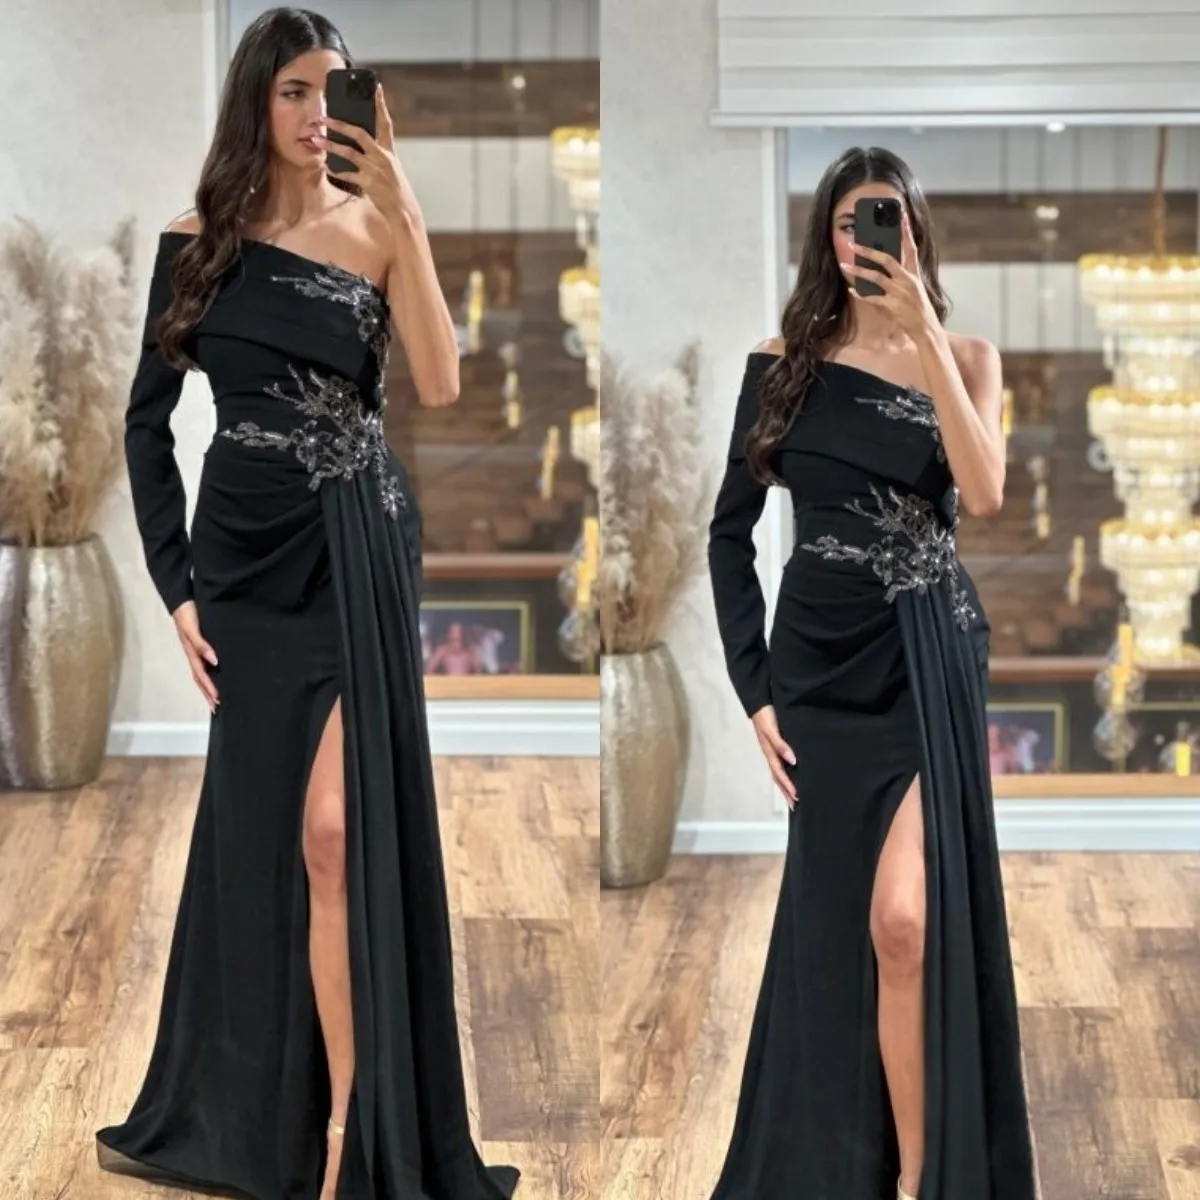 Buy Royal Blue Prom Dresses Elegant Engagement Dresses High Neck Long Tulle  Modest Long Sleeves Lace Ball Gowns - Ricici.com